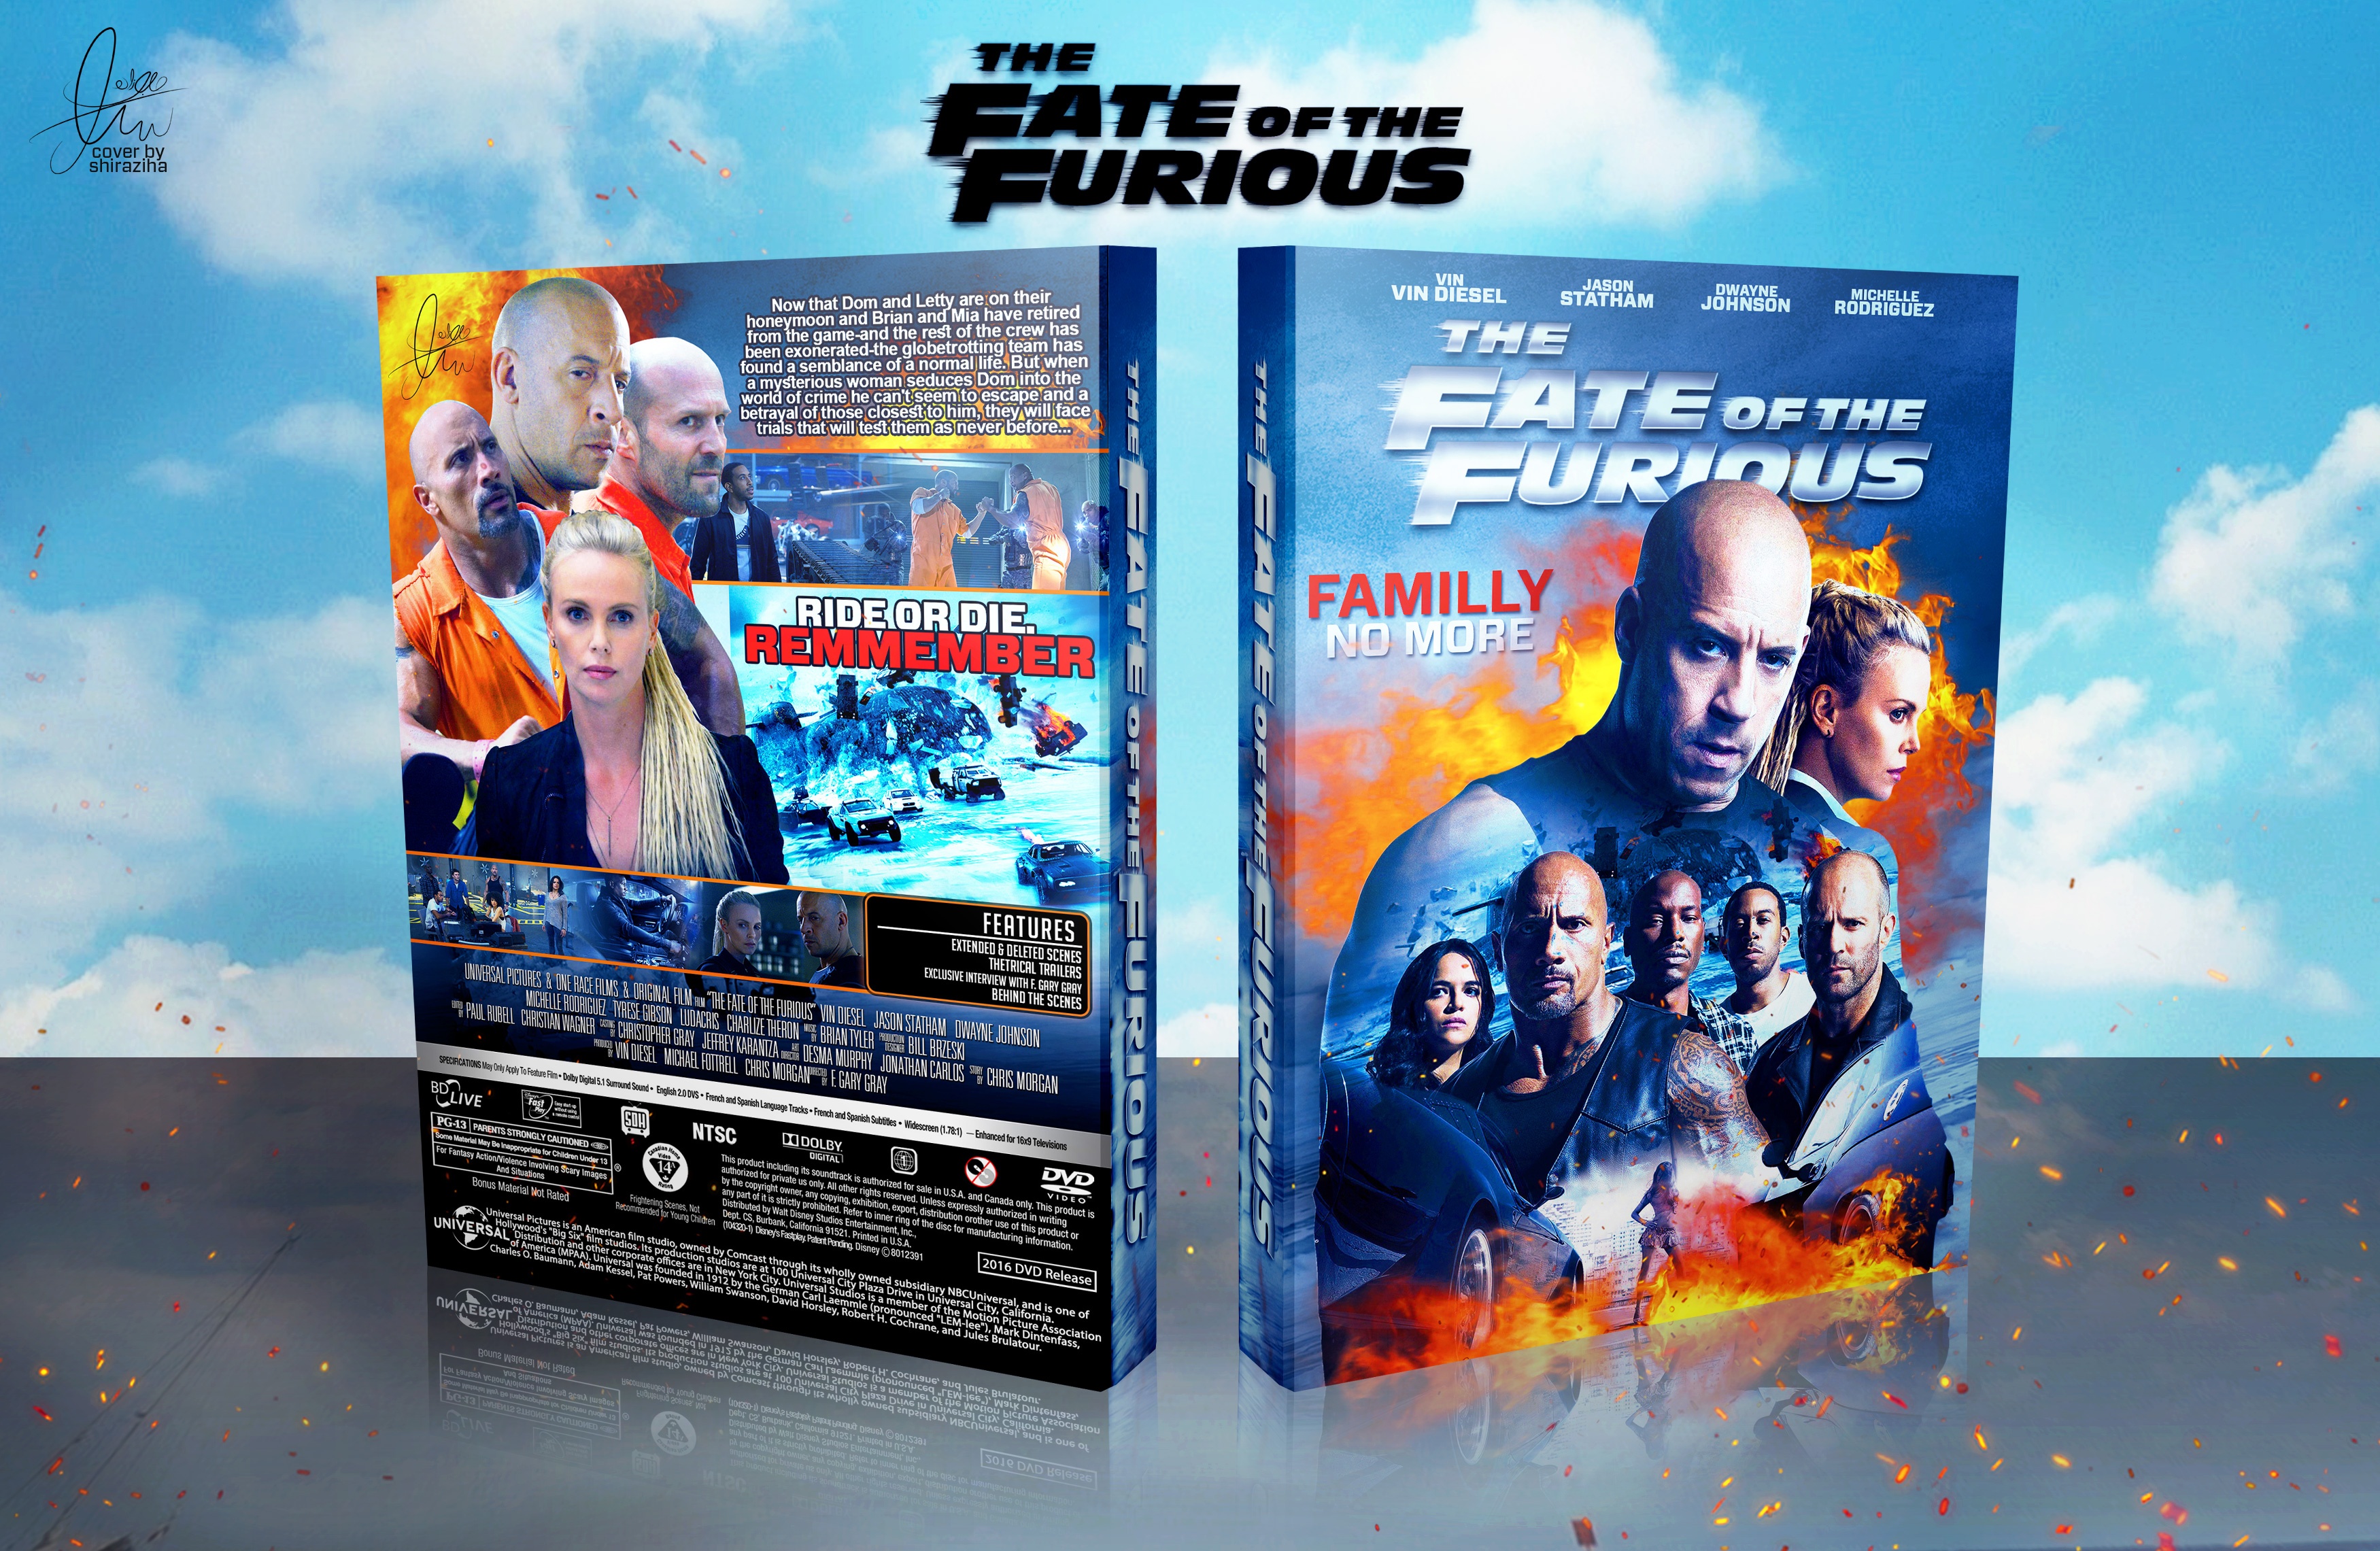 The Fate of the Furious box cover